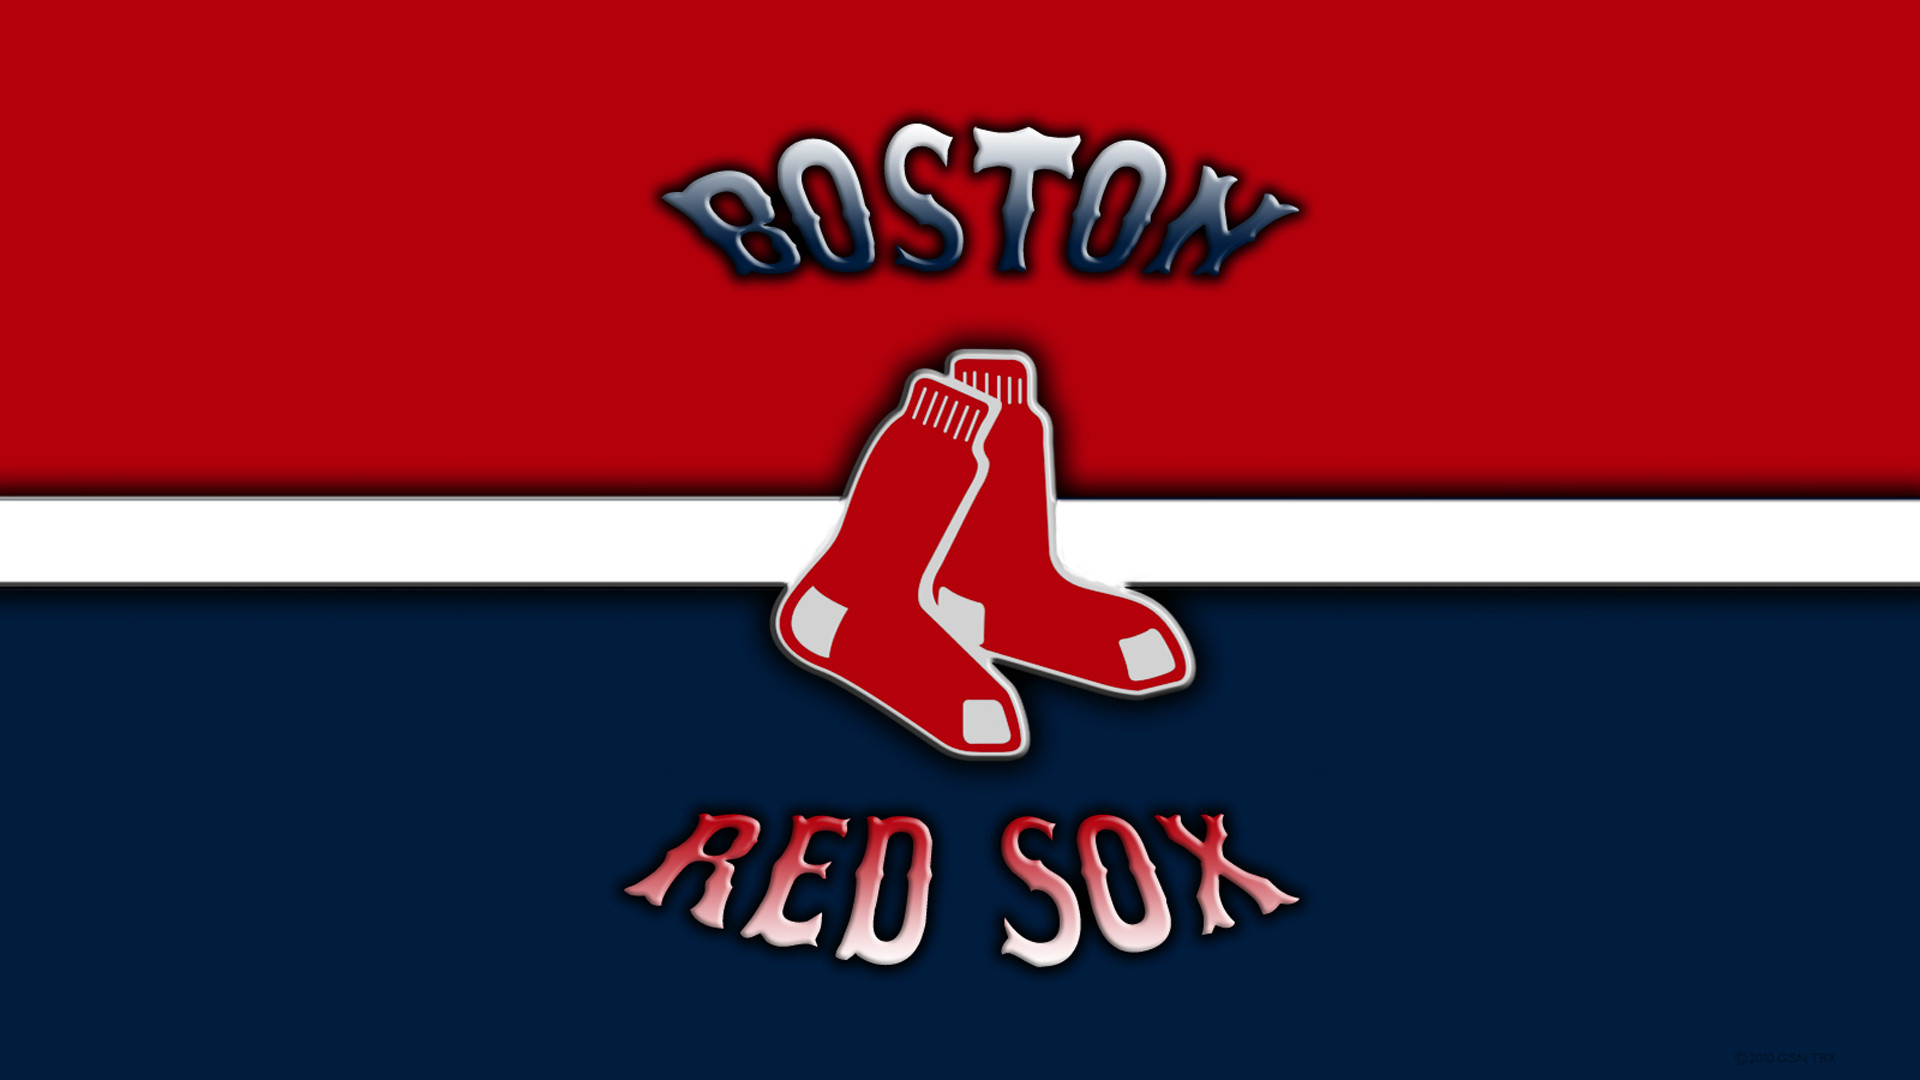 1920x1080 Red Sox Wallpaper free download.